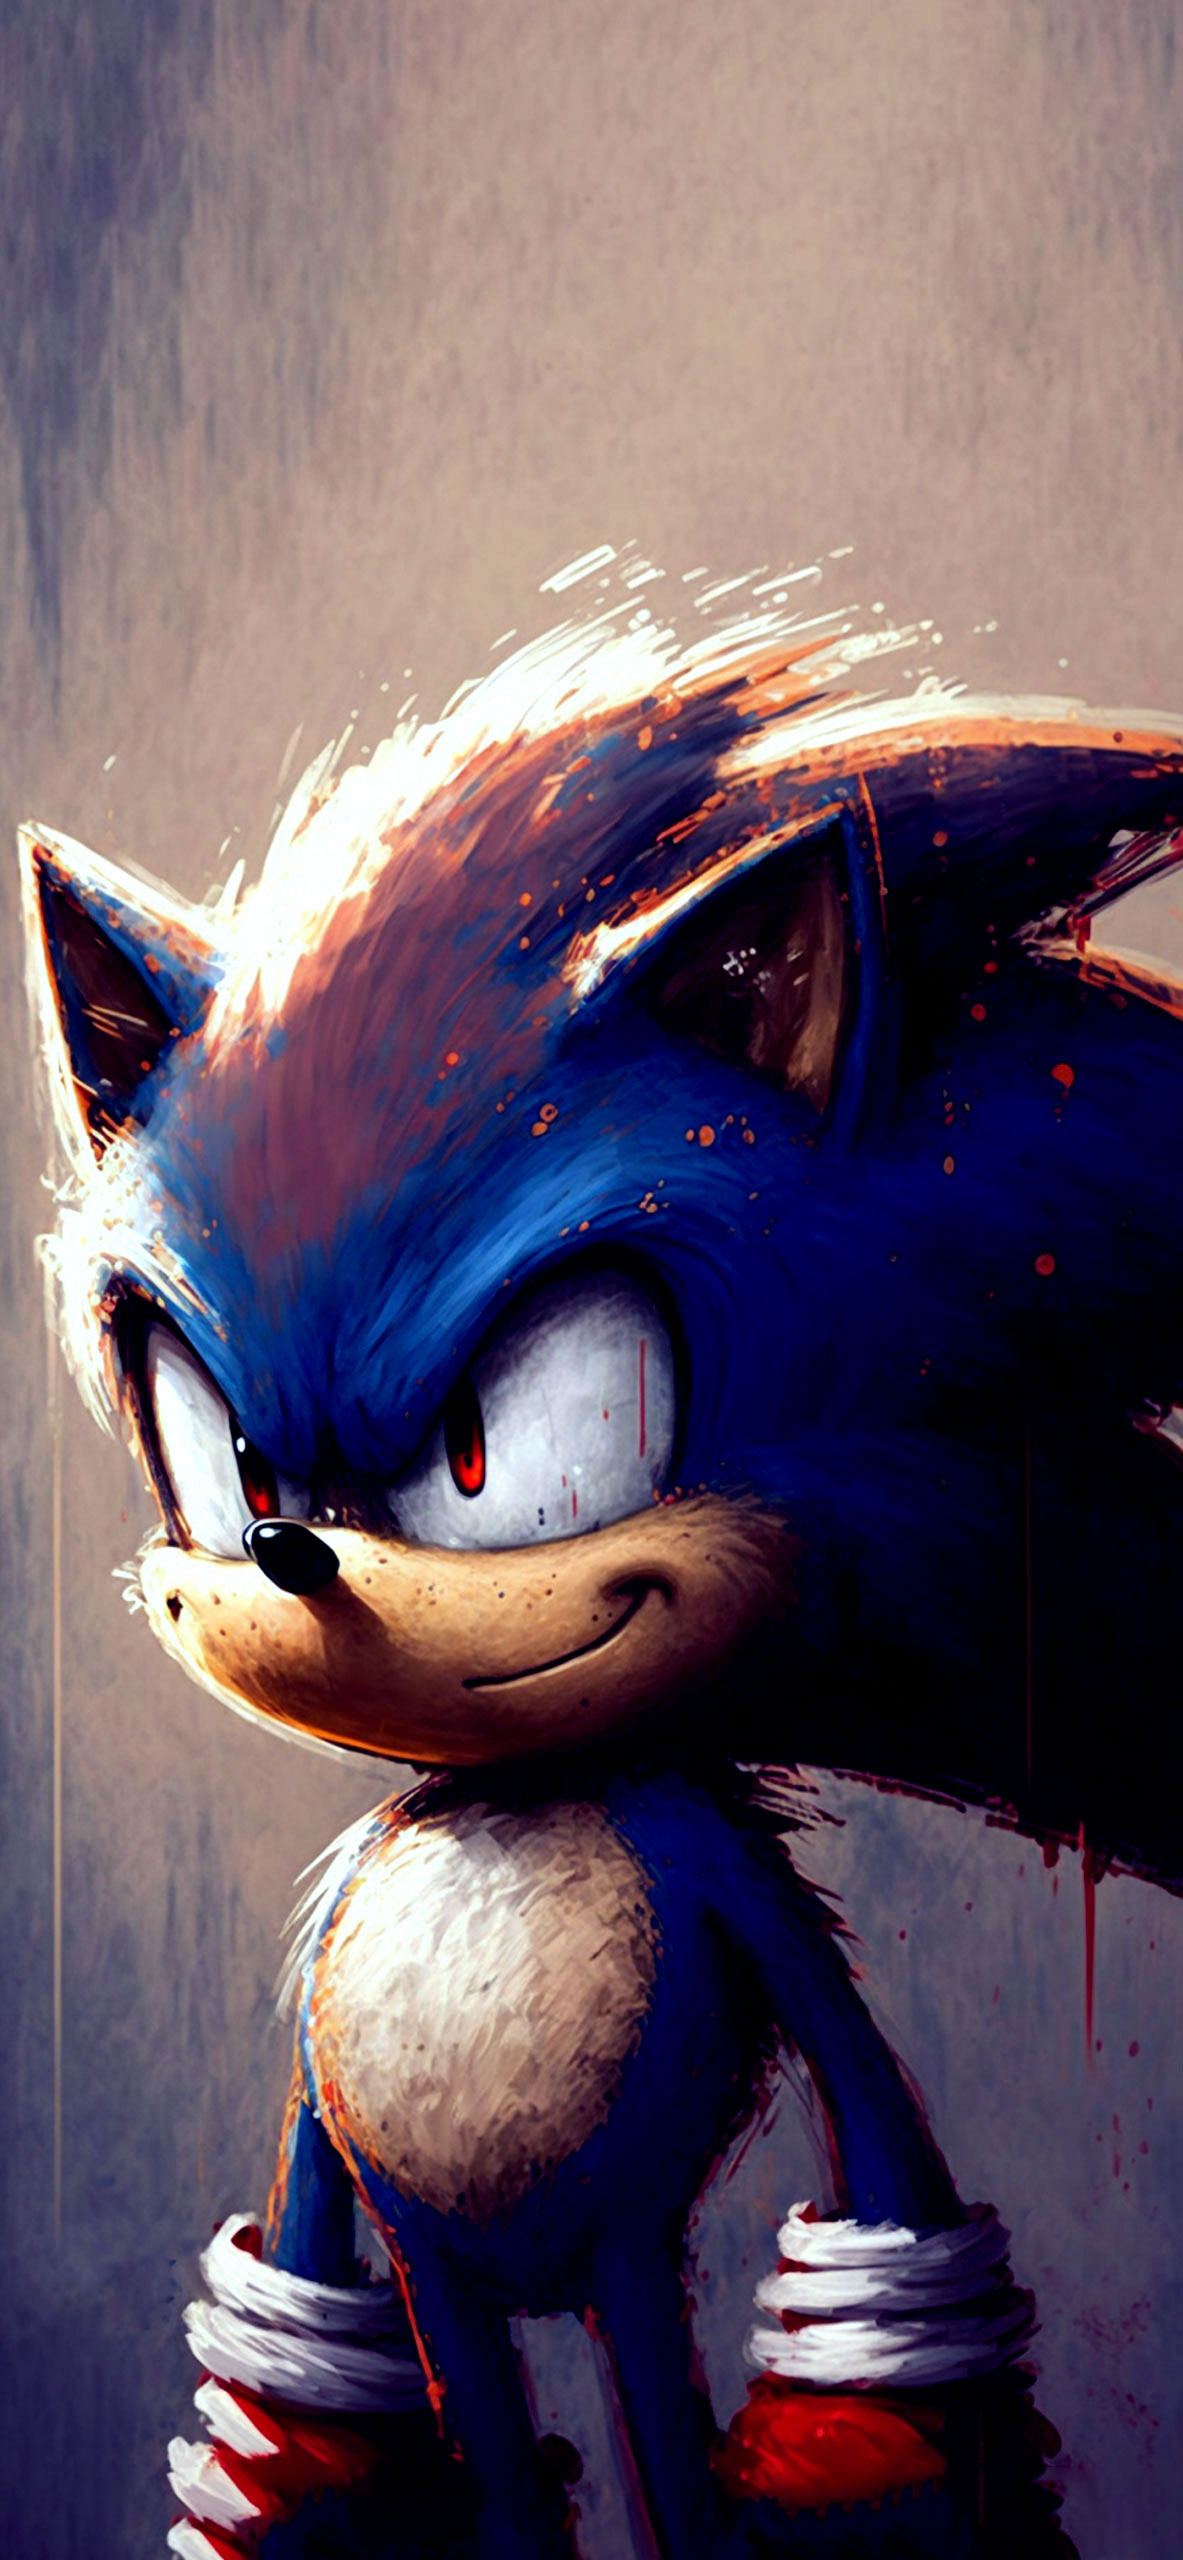 Sonic Art Wallpaper Aesthetic Wallpaper iPhone & Android